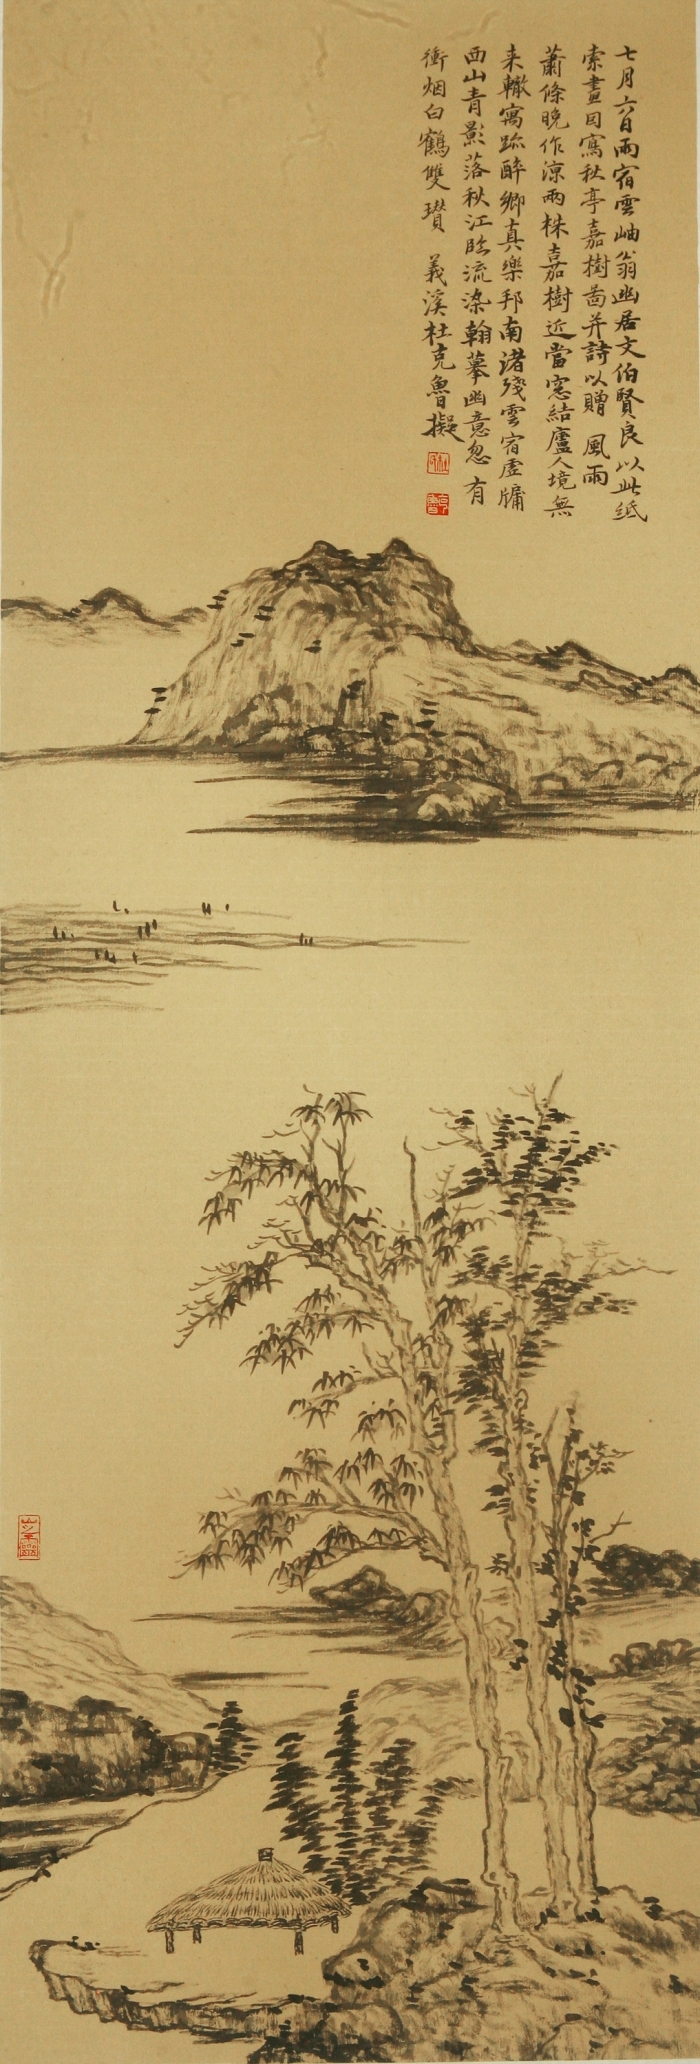 Hefeng Hall Gallery's Contemporary Chinese Painting - Learning form the Past 4